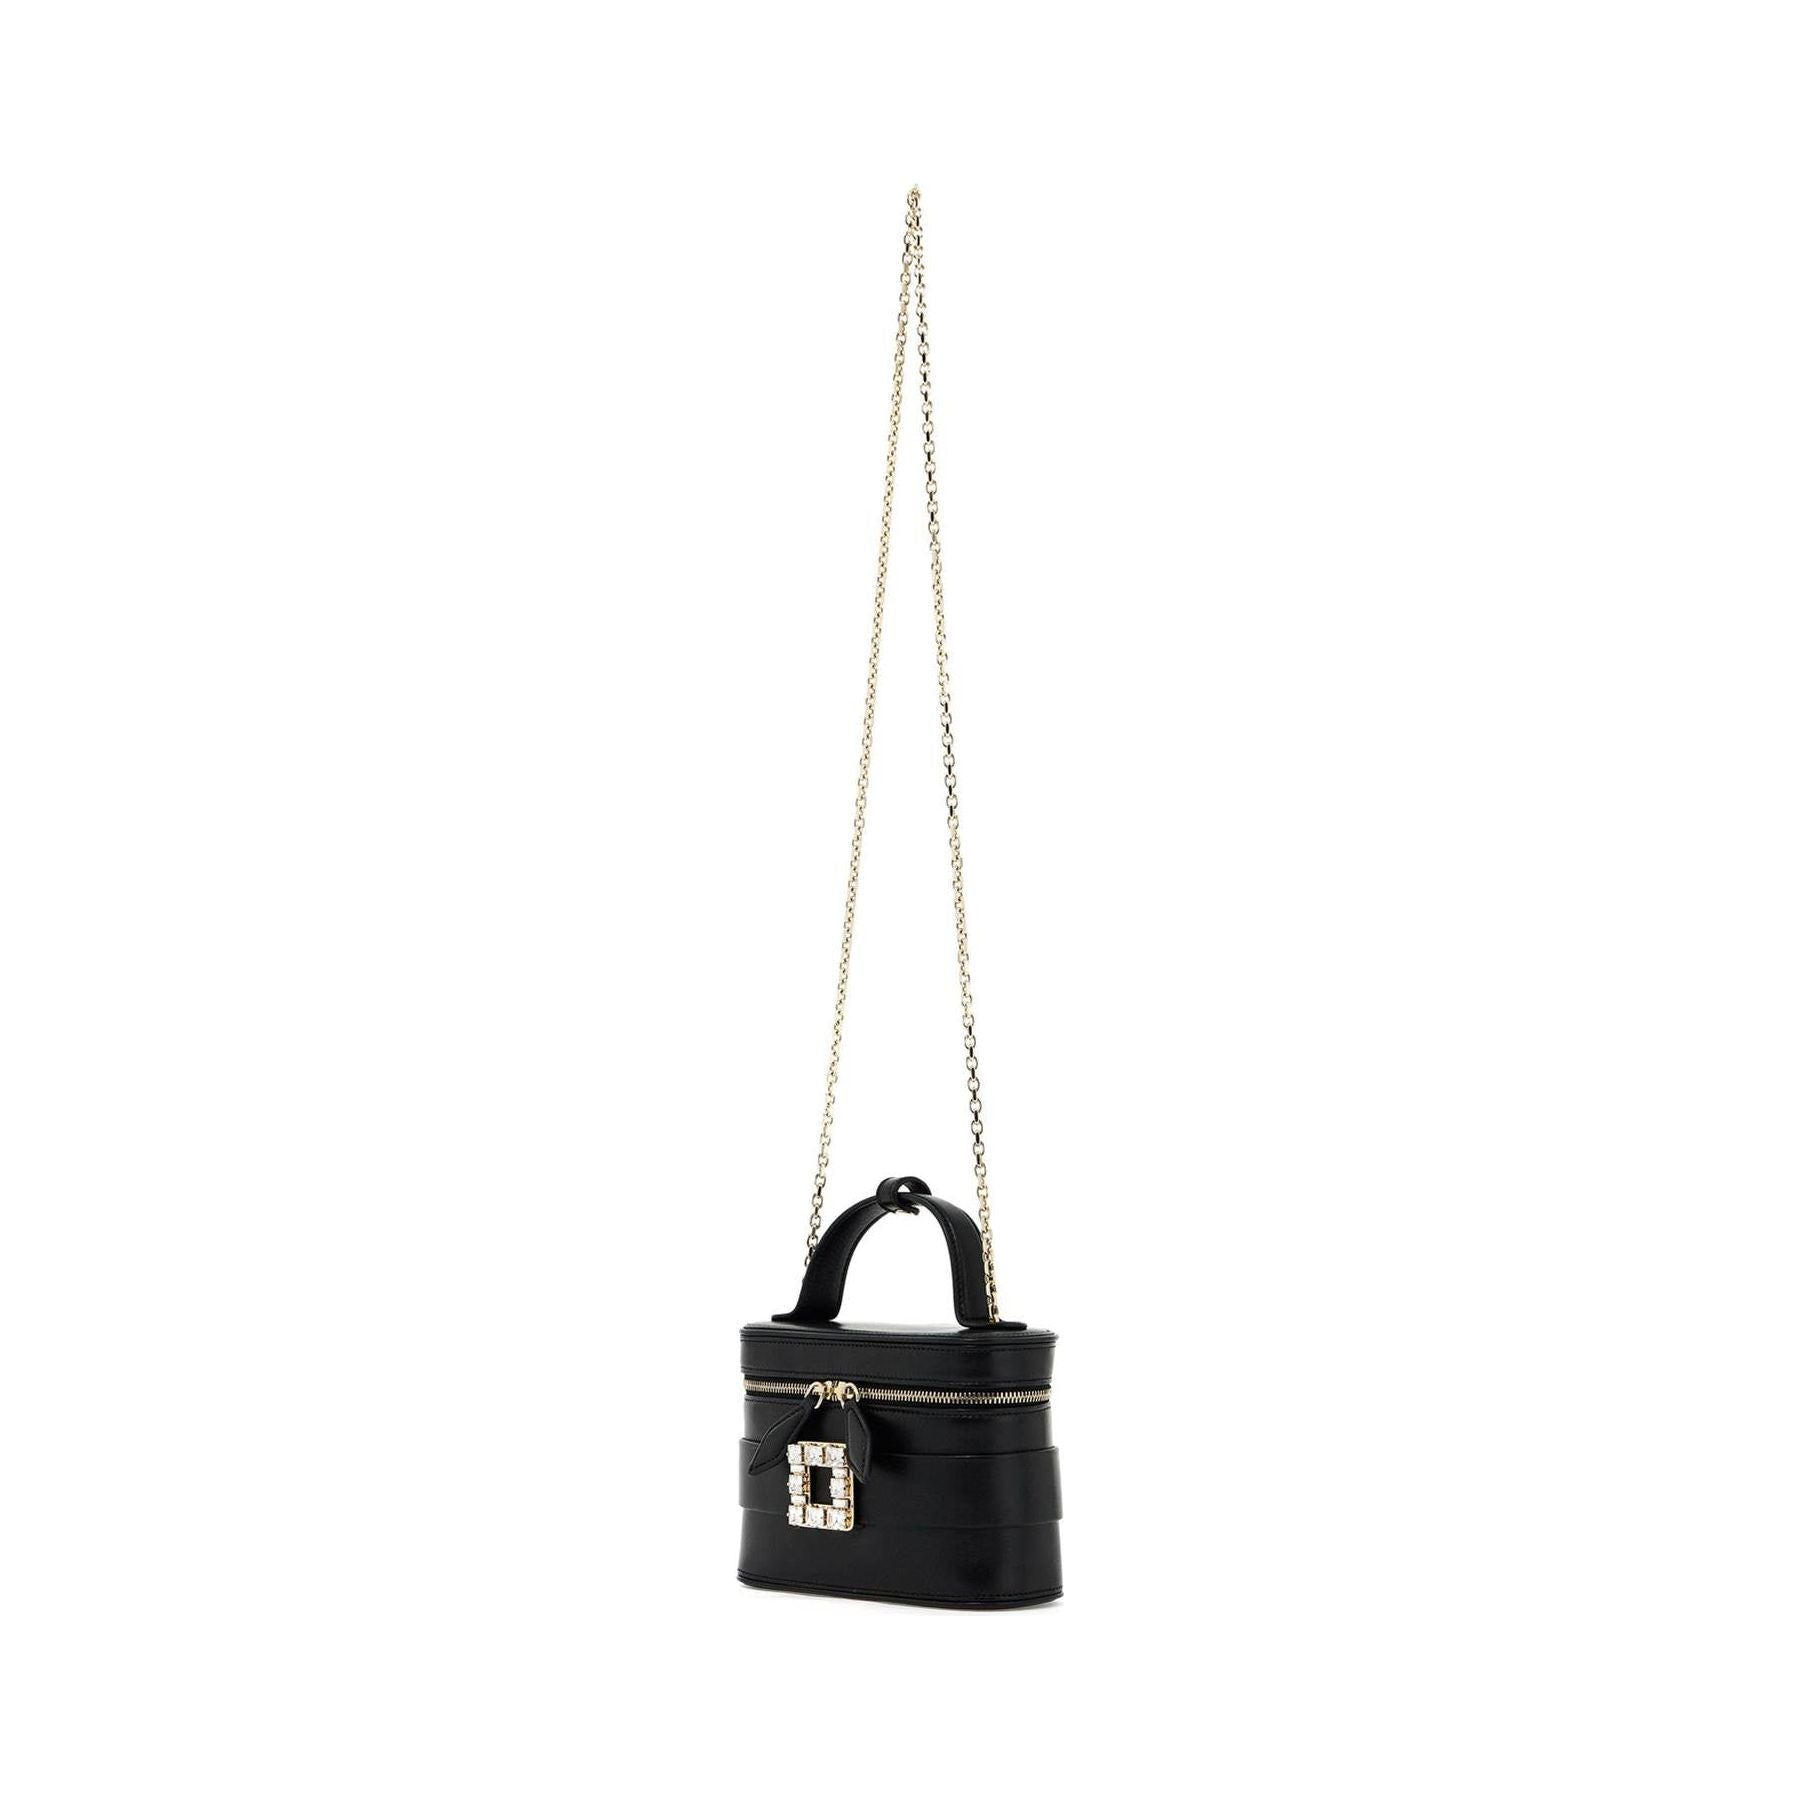 Nappa Leather Vanity Strass Buckle Bag